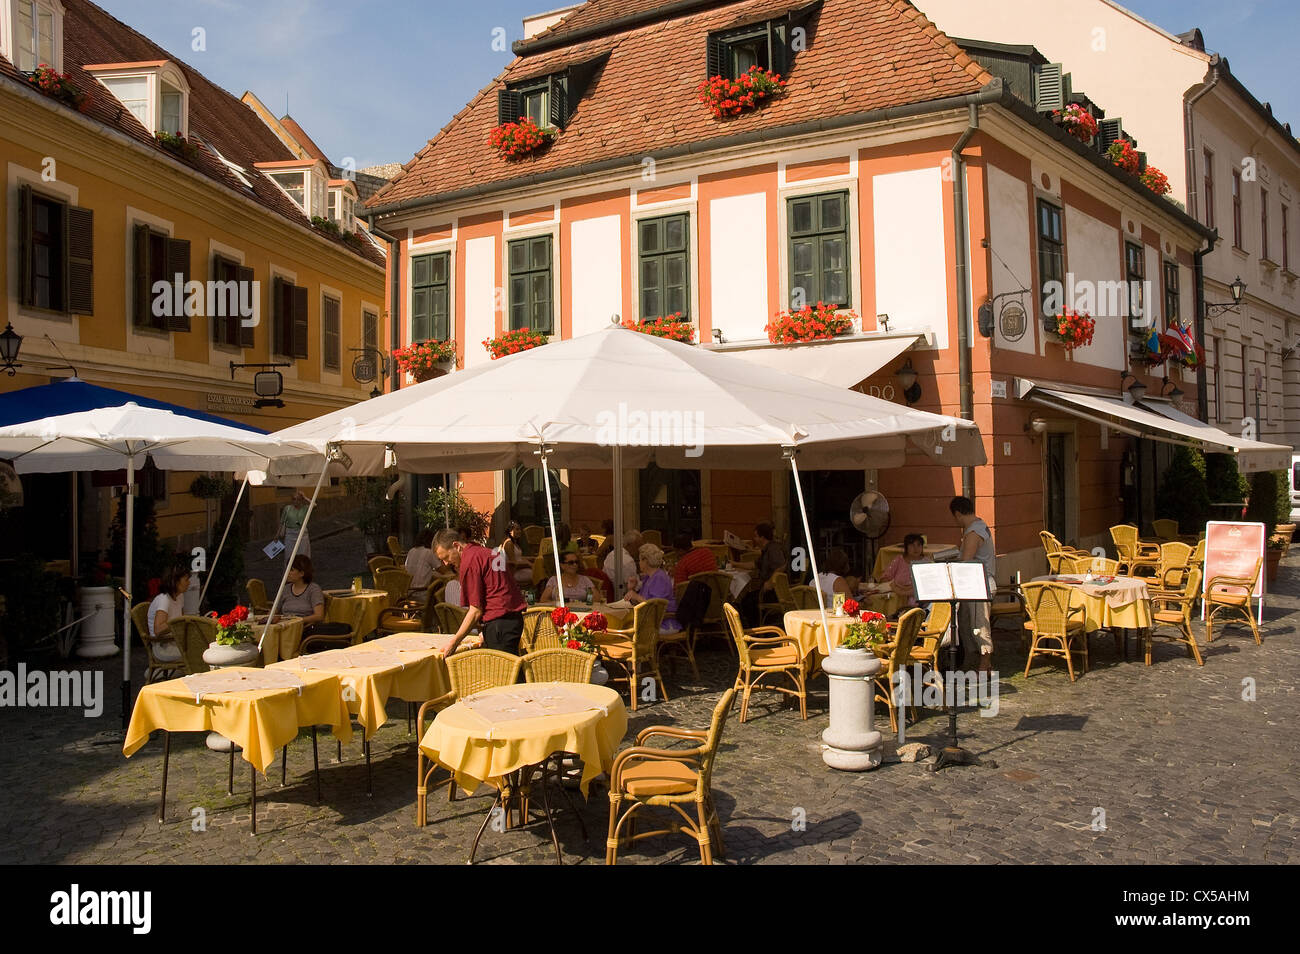 Elk190-2908 Hungary, Eger, outdoor restaurant, setting up tables on the street Stock Photo